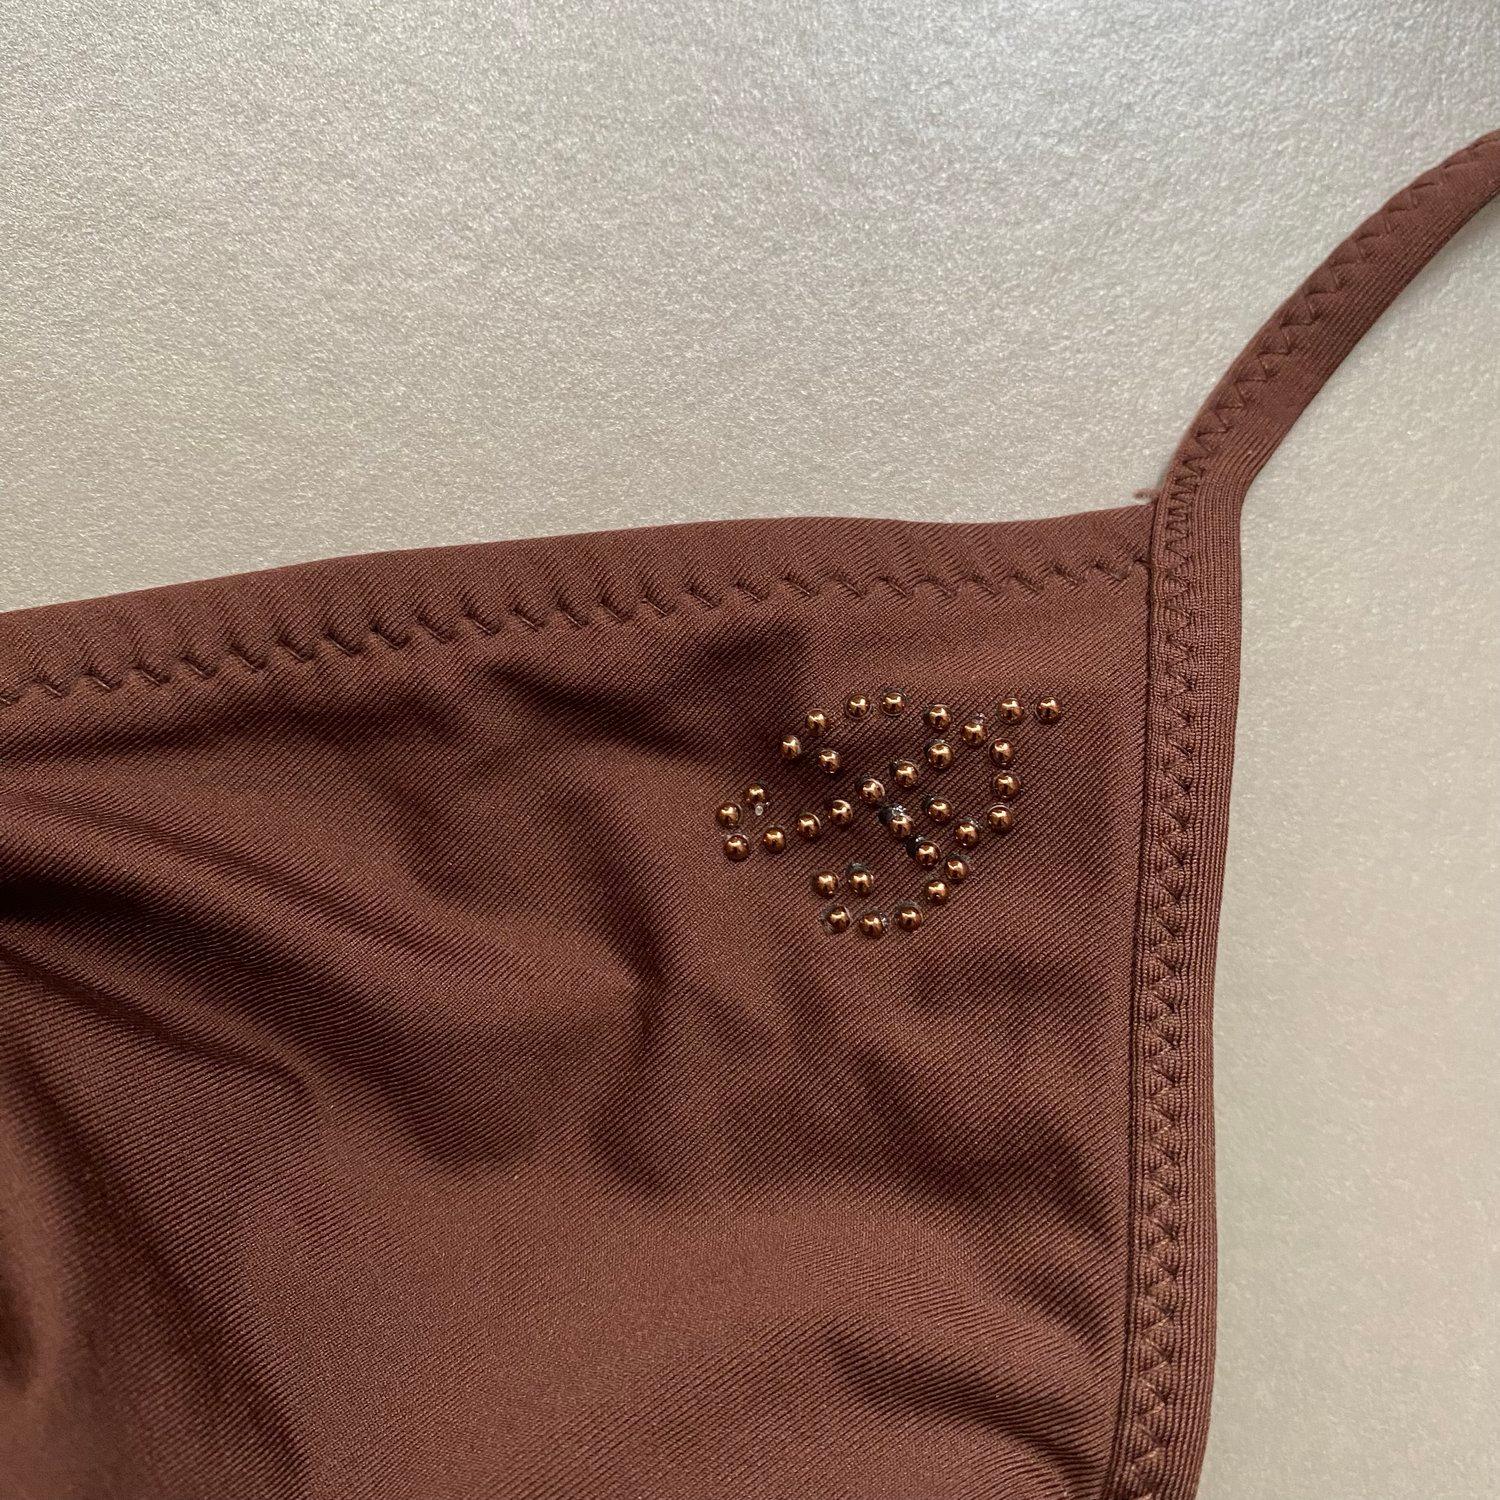 Vintage y2k Blumarine bikini in brown with gemstone ‘B’ for Blumarine detailing. Drawstring style bikini top for adjustable fit and tanga style bikini bottoms. Authenticity label to the inner.

Period
Circa 2000s

Measurements
Label (top): M
Label